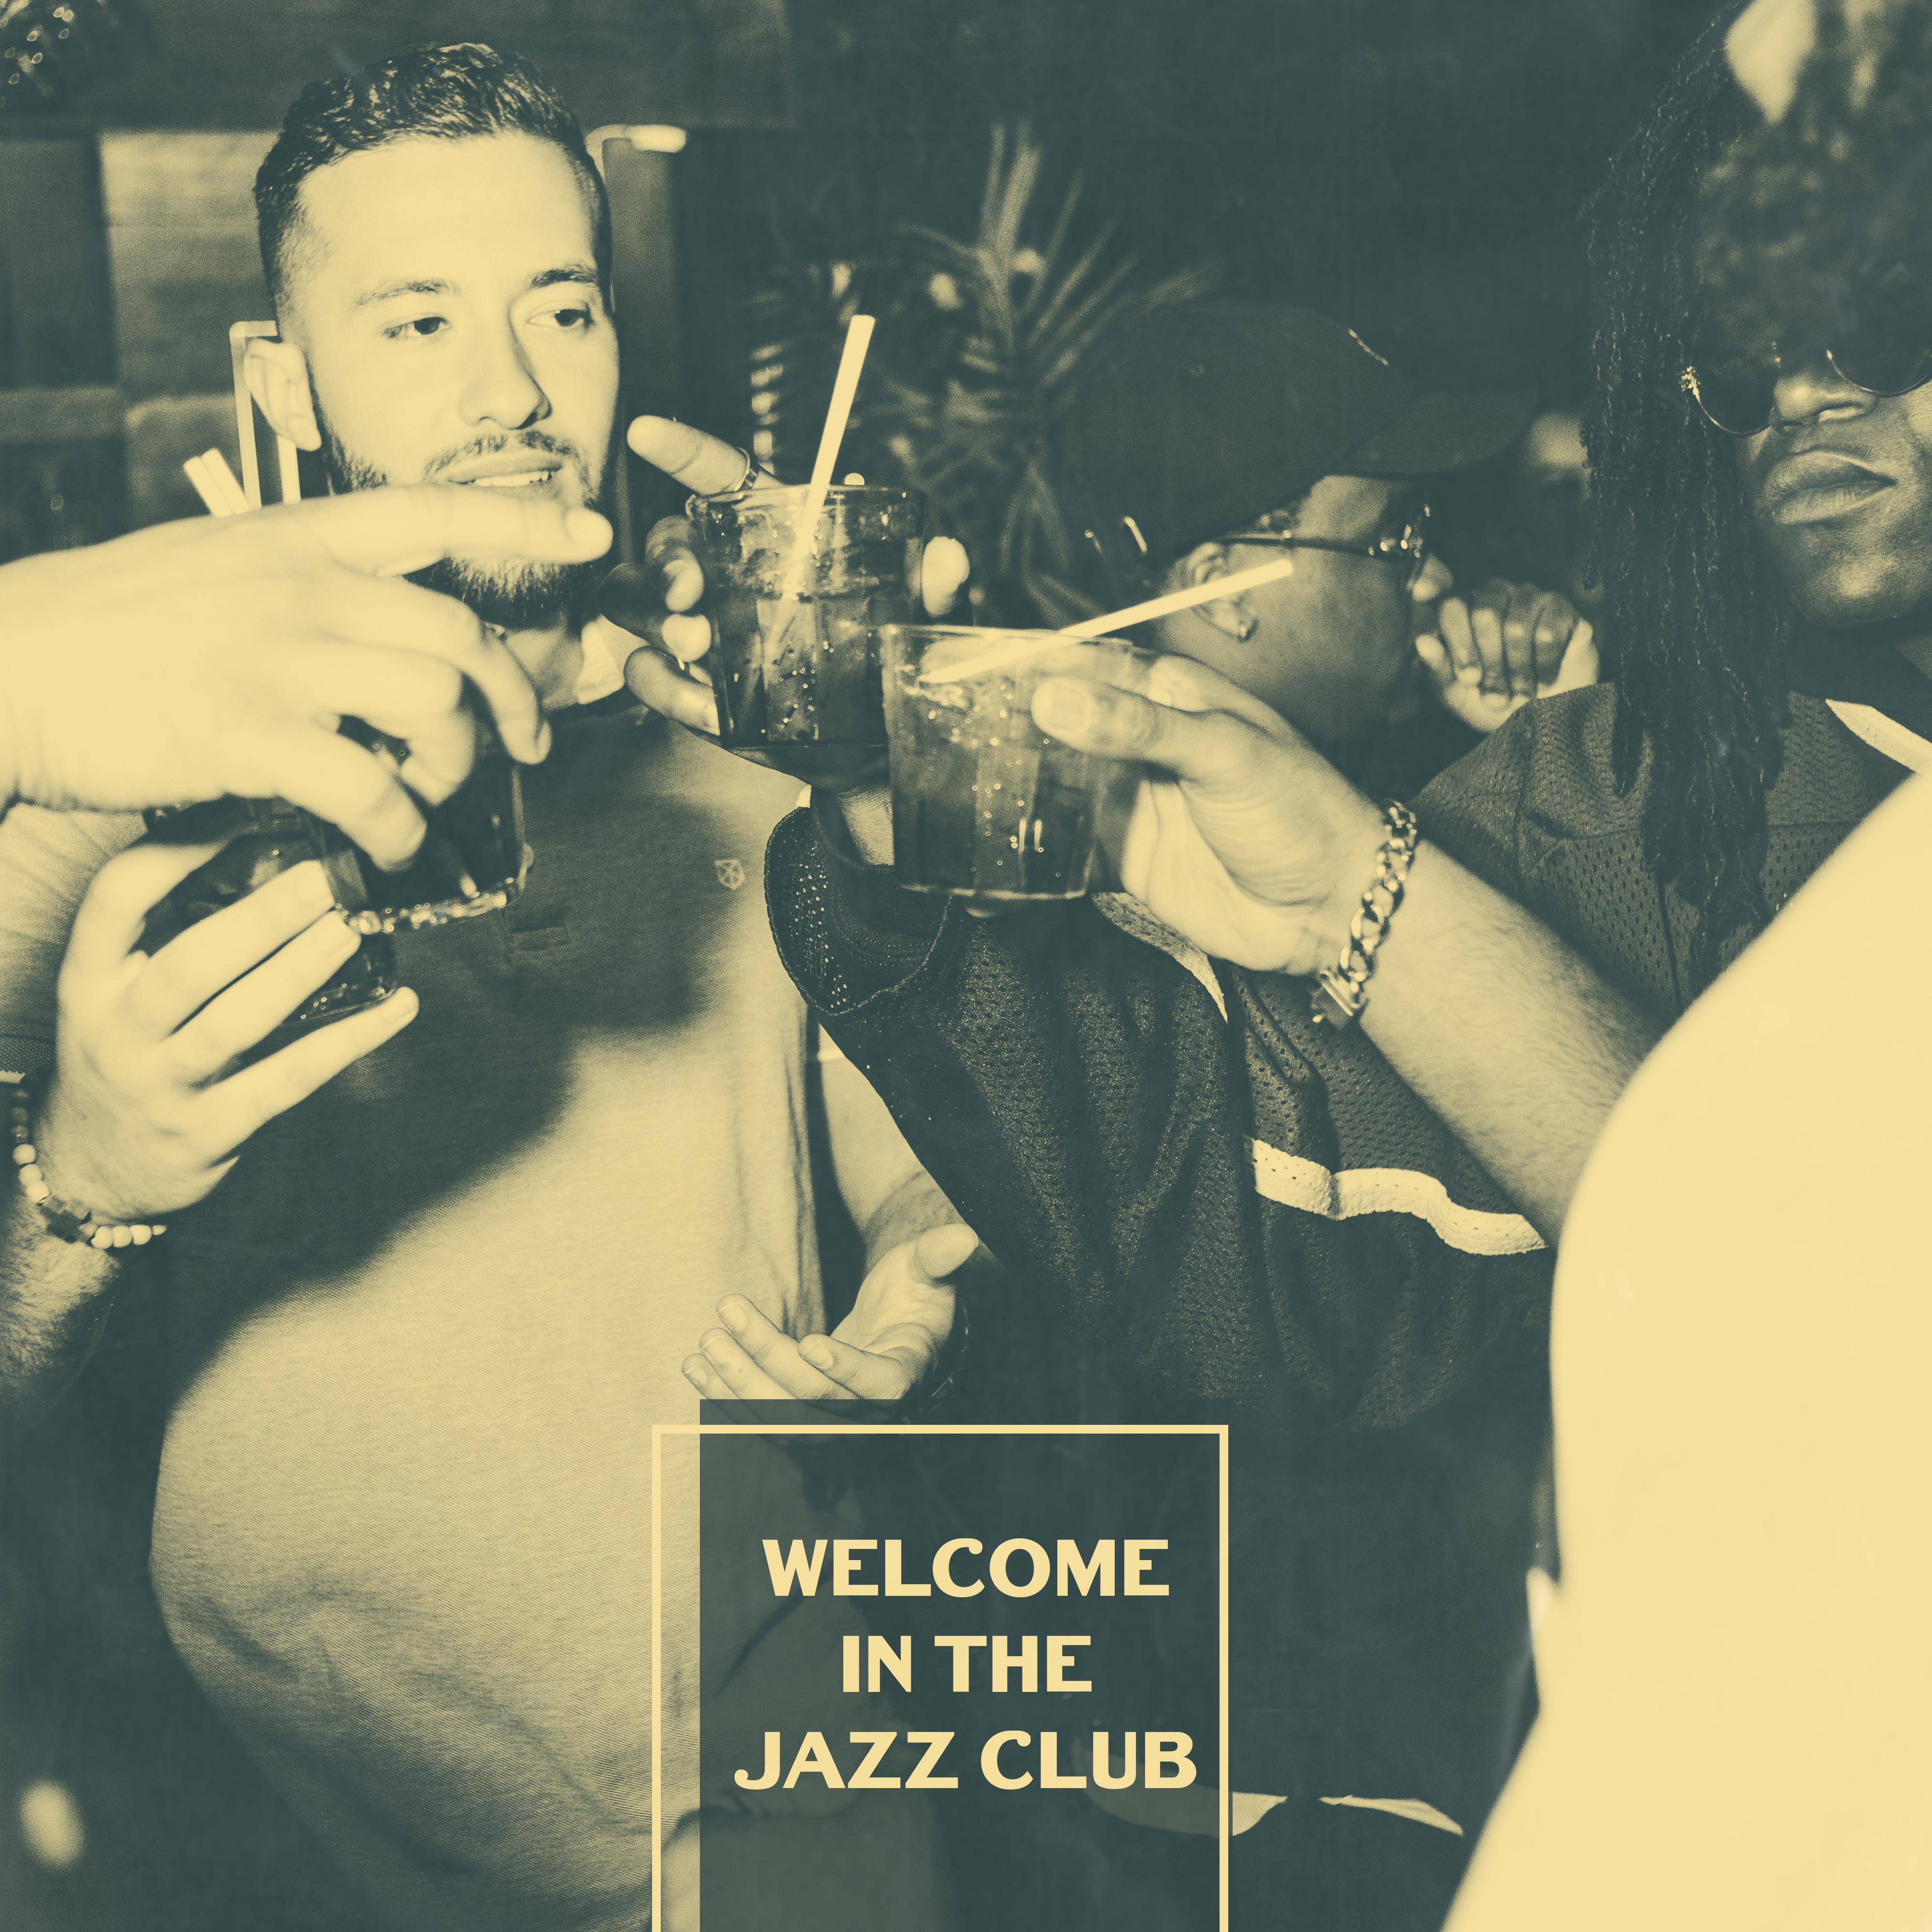 Welcome in the Jazz Club: 2019 Smooth Jazz Music Created for Old School Jazz Club, Bar or Cafe, Vintage Styled Melodies Played on Piano, Contrabass, Sax & Many More